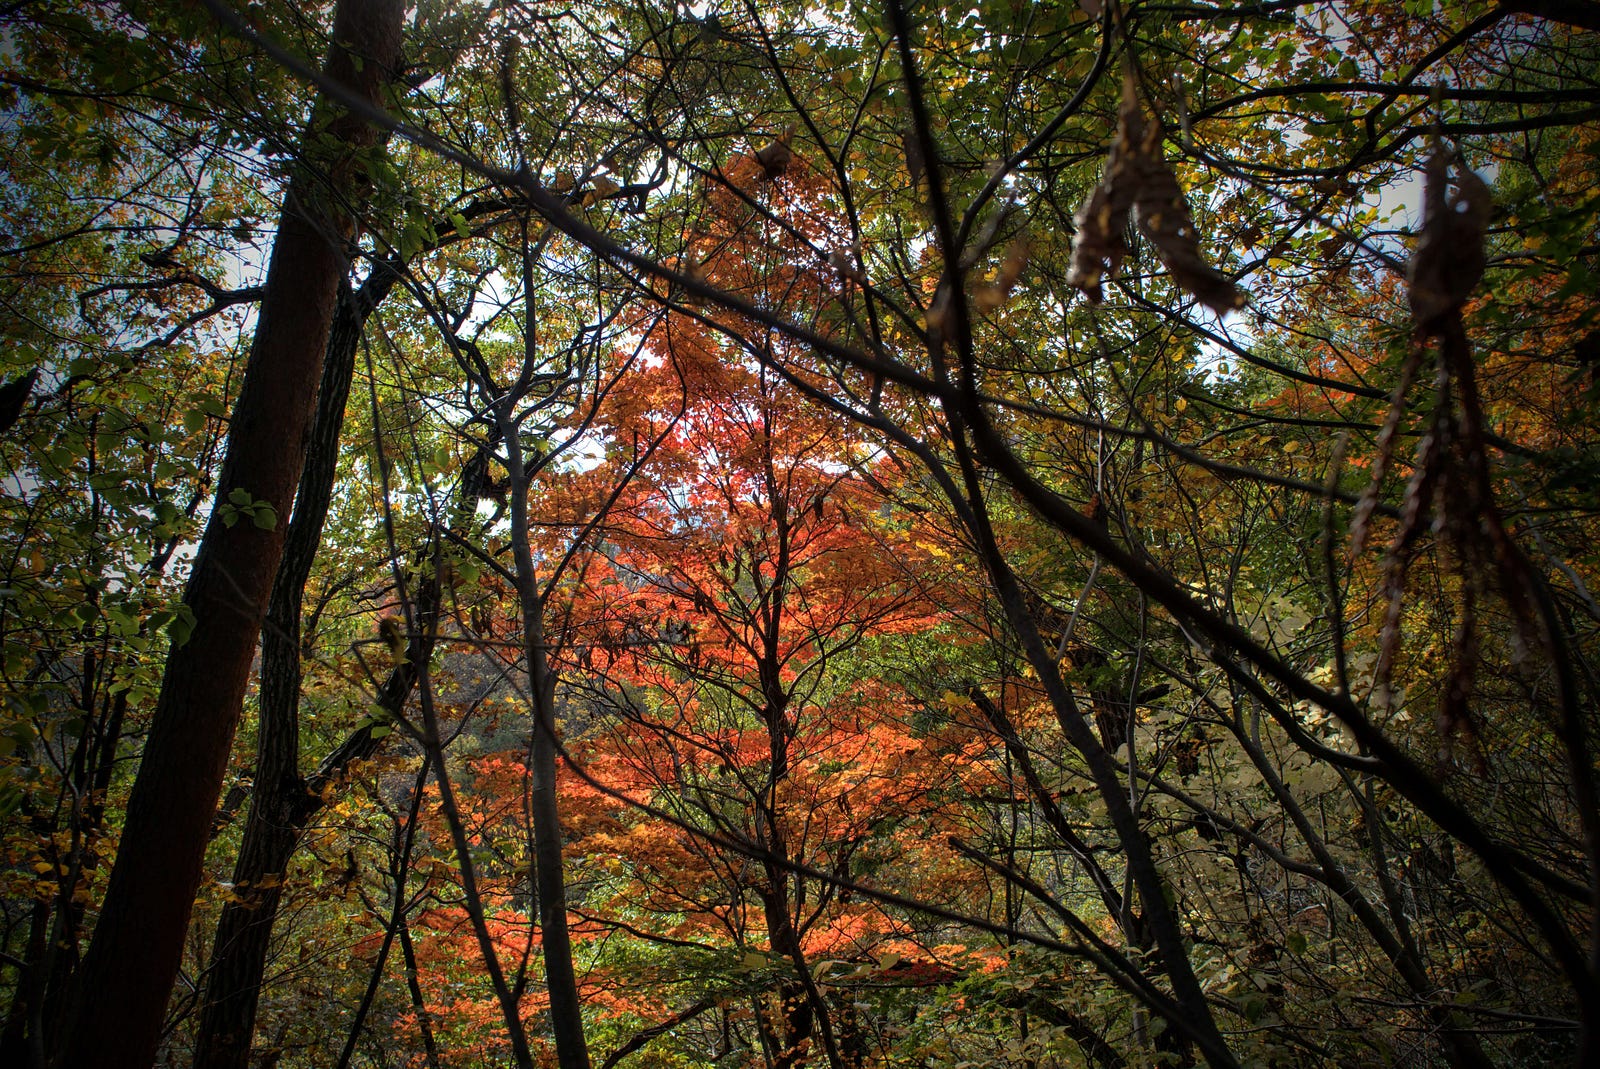 One bright red tree stands out amongst the green autumn leaves of Mt. Hokari